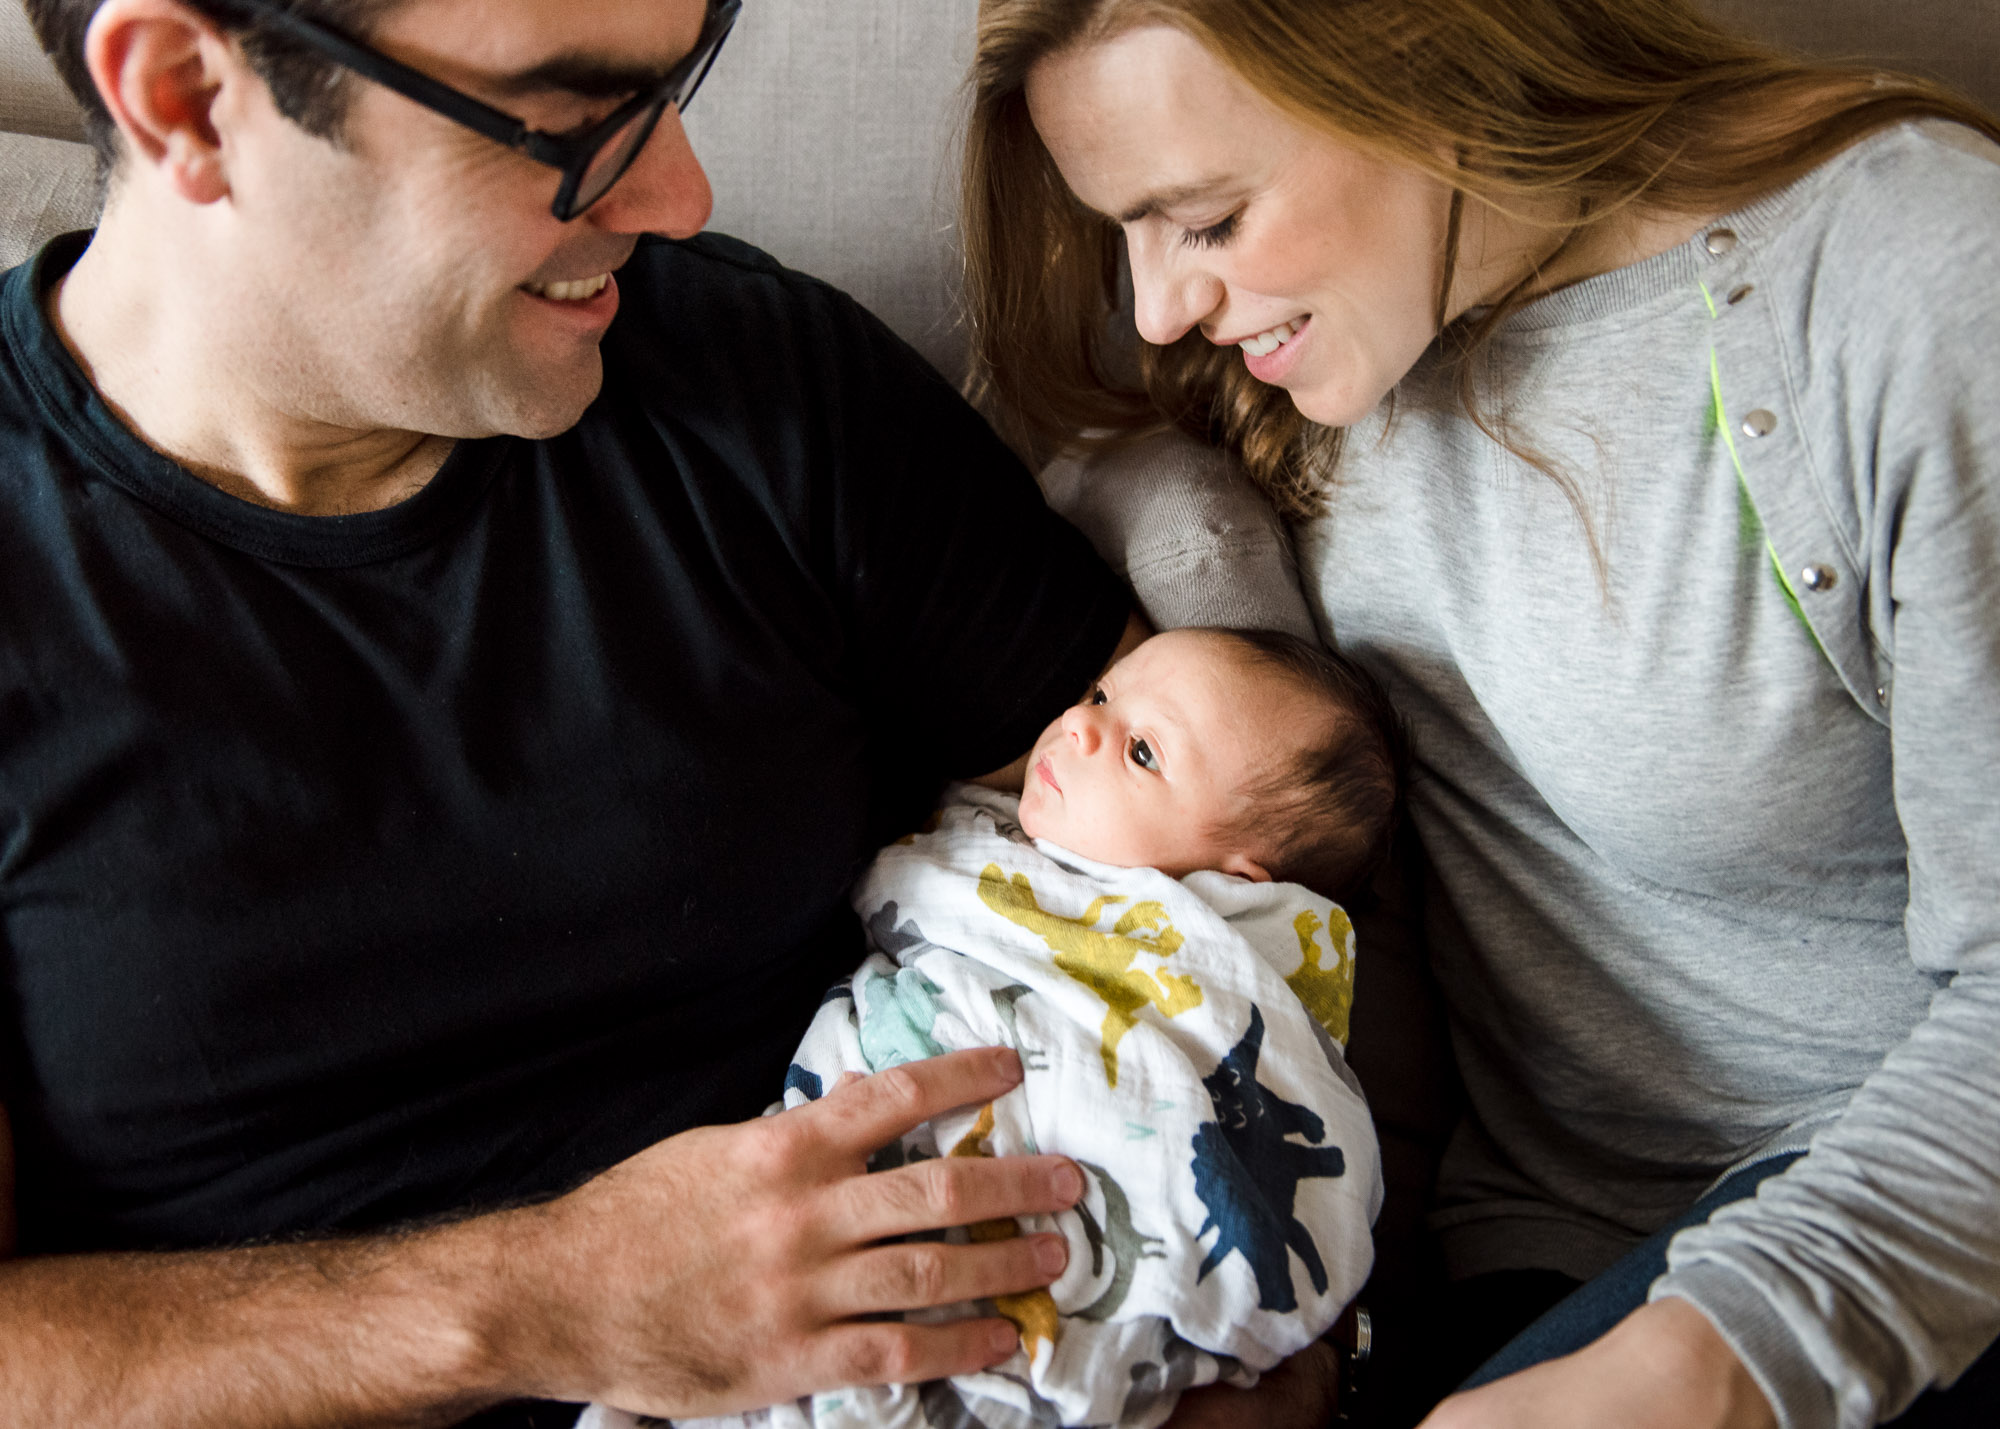 An Edmonton family cuddles on their couch during their newborn baby photo session